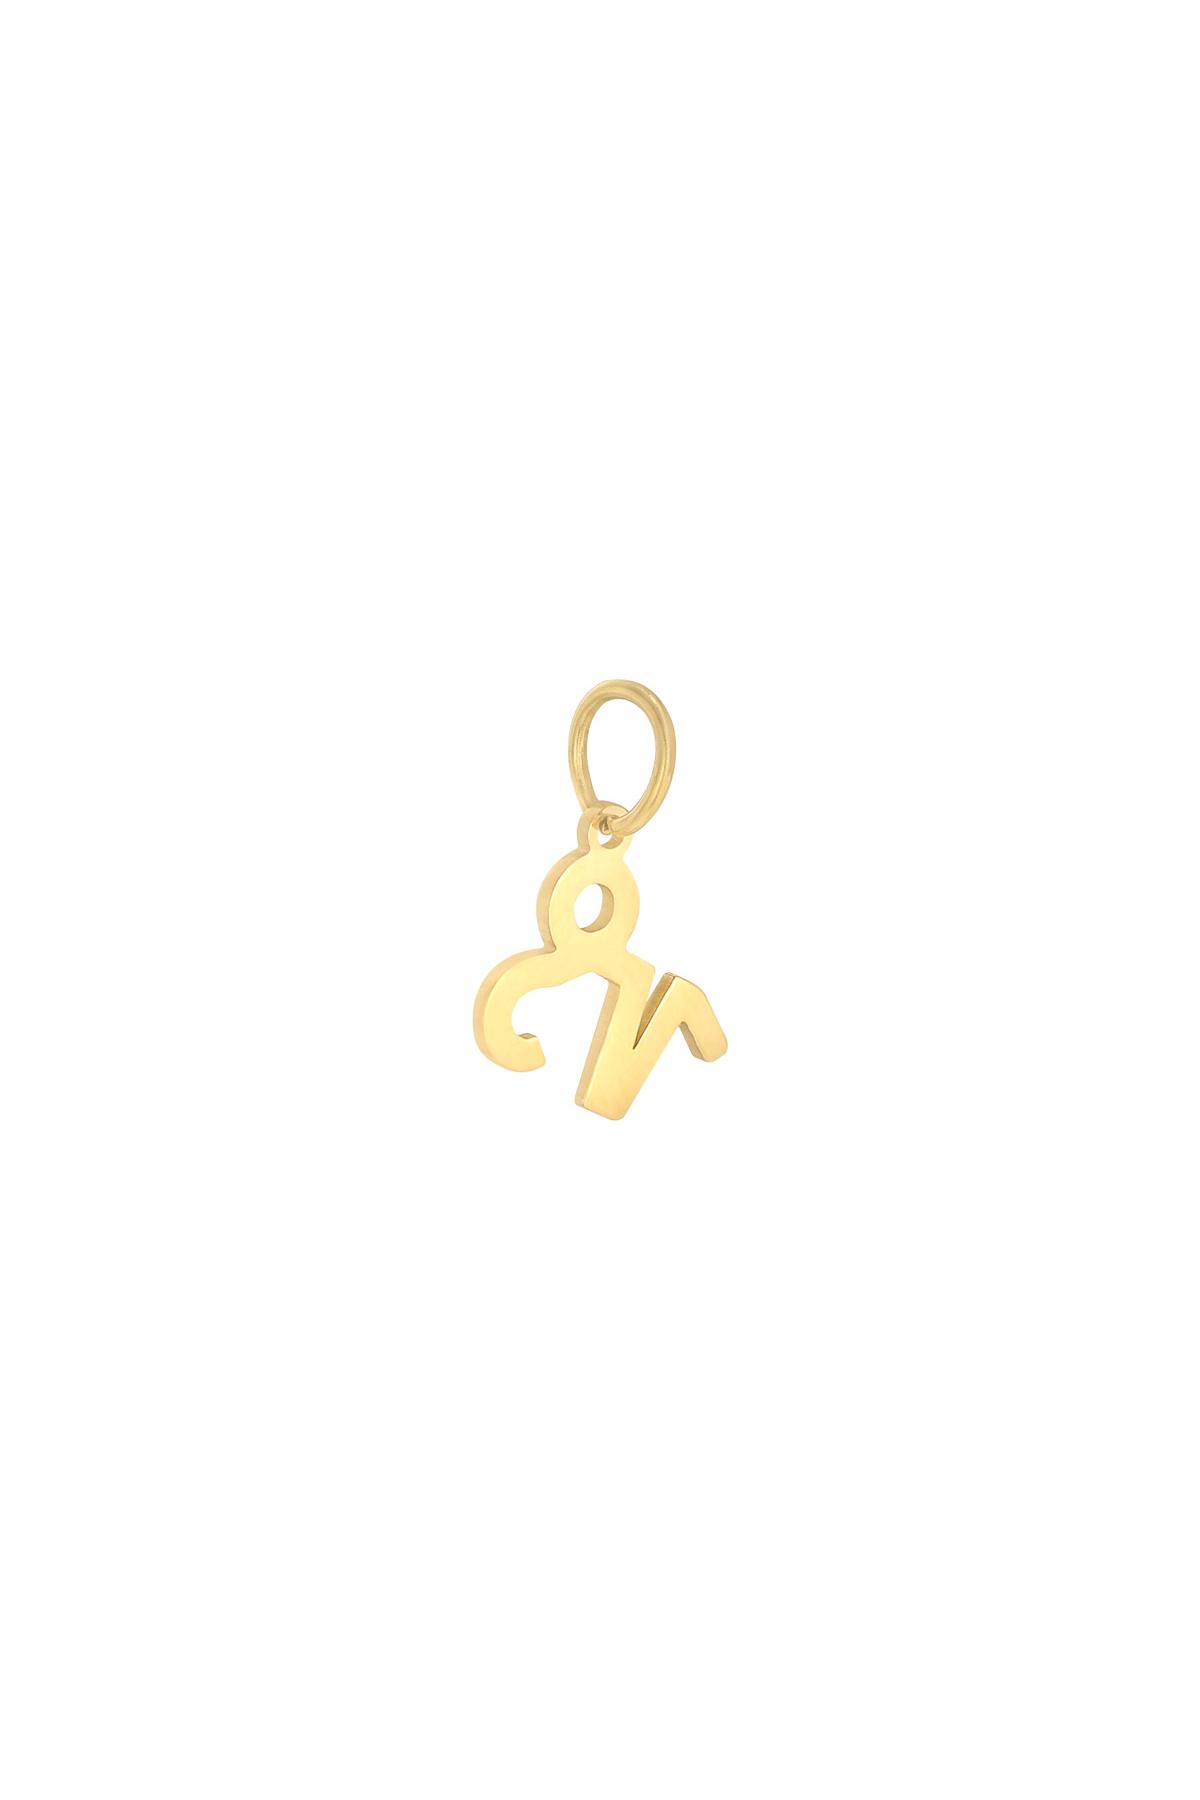 Gold / Charm Zodiac Capricorn Gold Stainless Steel Picture15